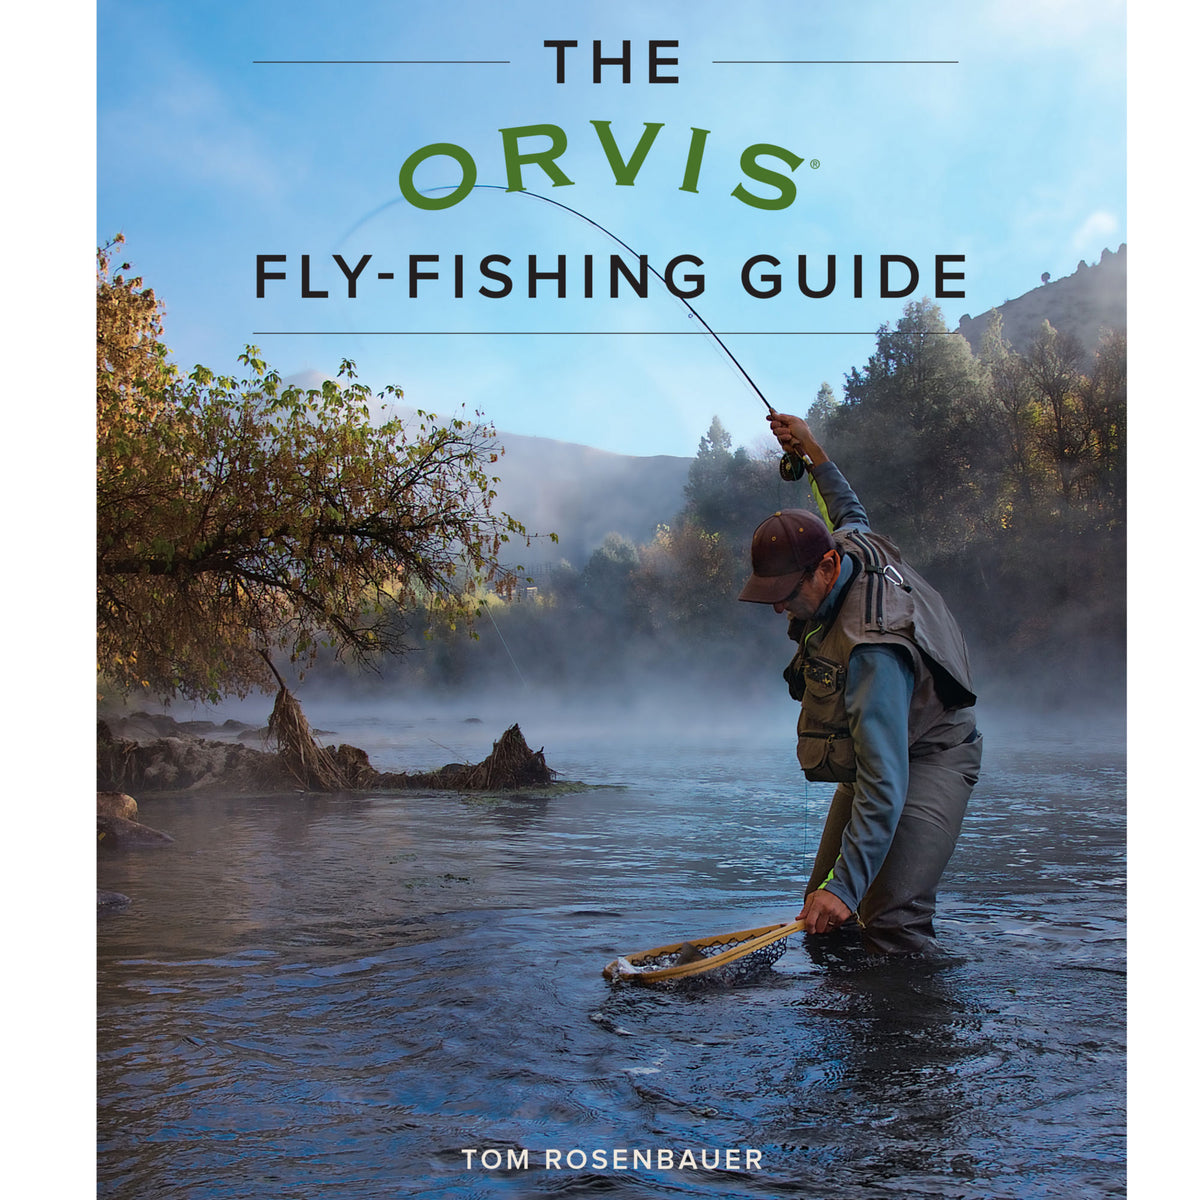 The Orvis Fly-Fishing Guide by Tom Rosenbauer – Fish Tales Fly Shop